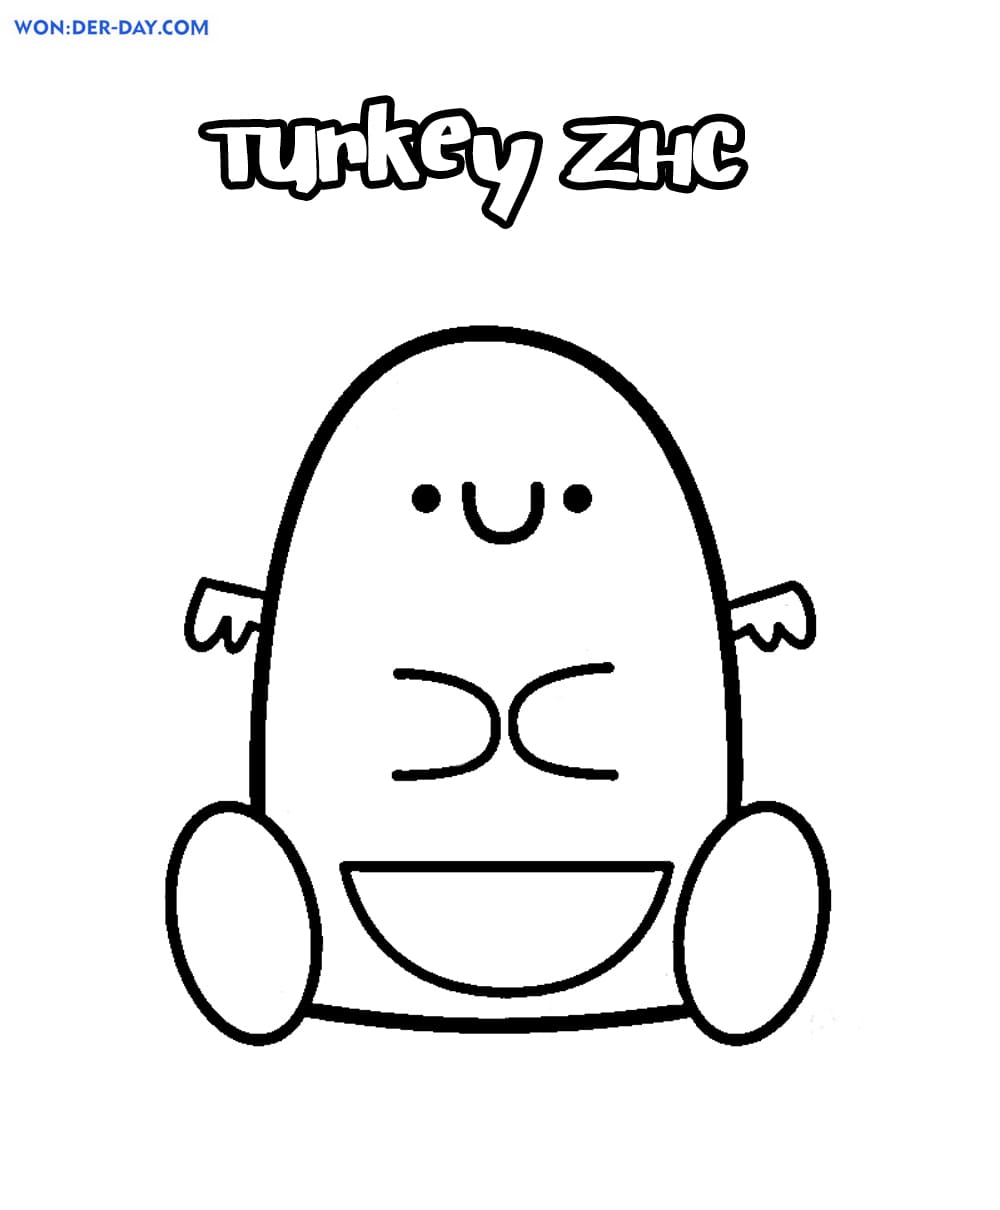 ZHC Coloring pages - Free Coloring pages | WONDER DAY — Coloring pages for  children and adults